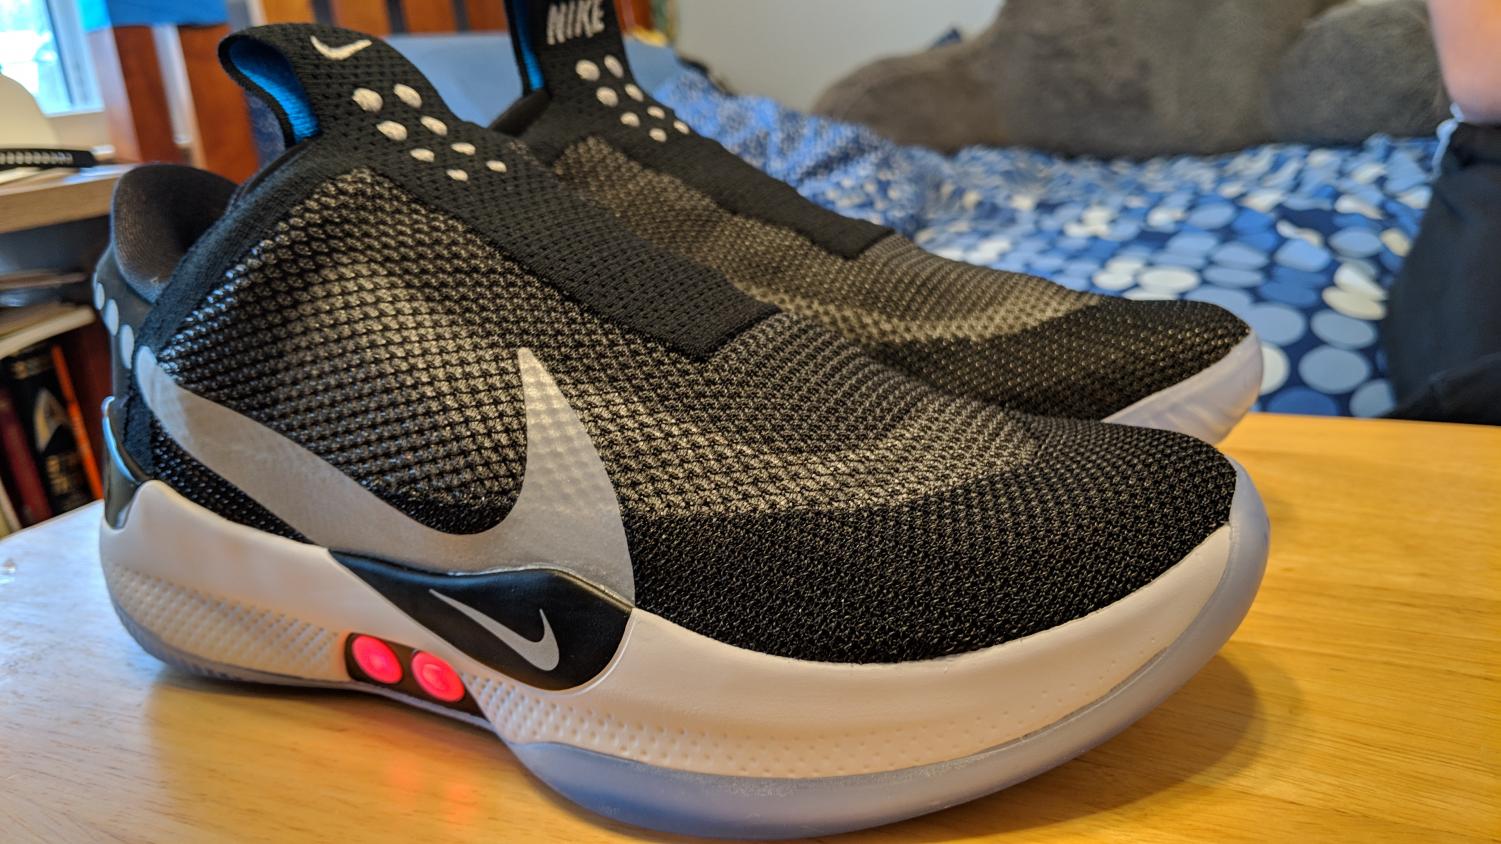 The Nike Adapt BB Self-Lacing Shoes